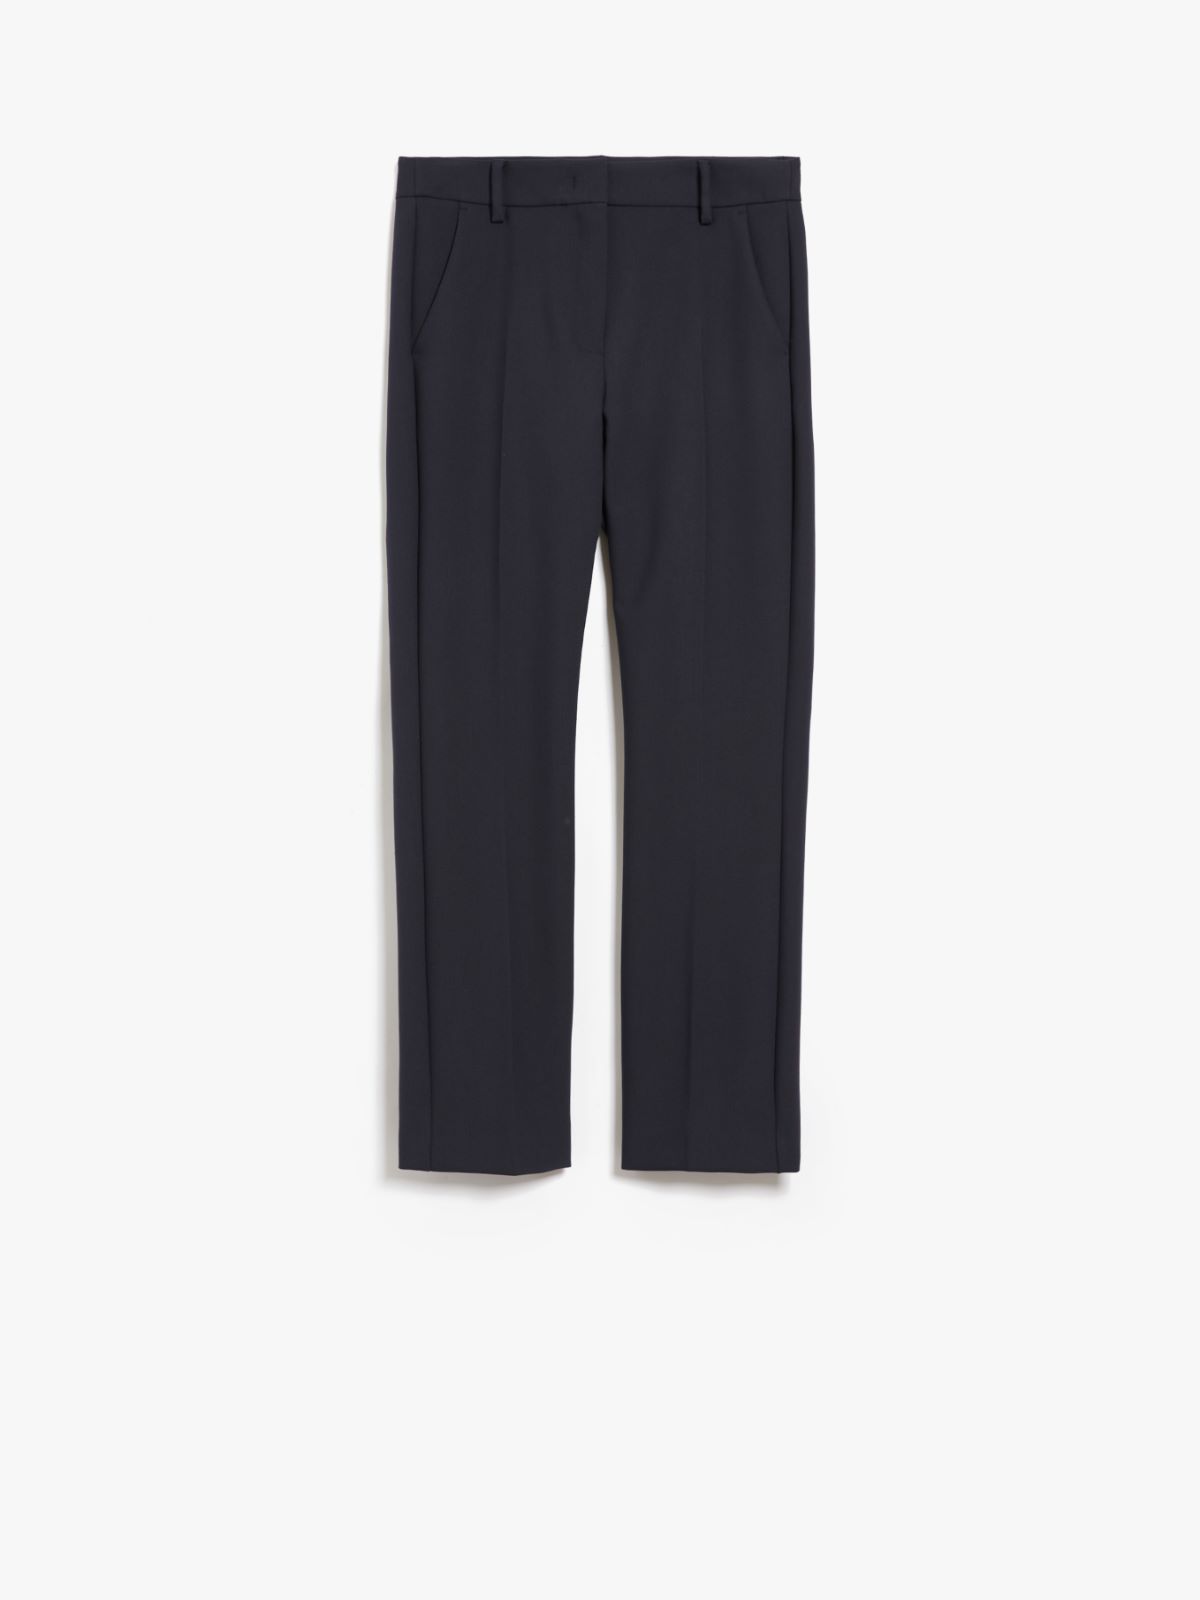 Canvas trousers - NAVY - Weekend Max Mara - 5